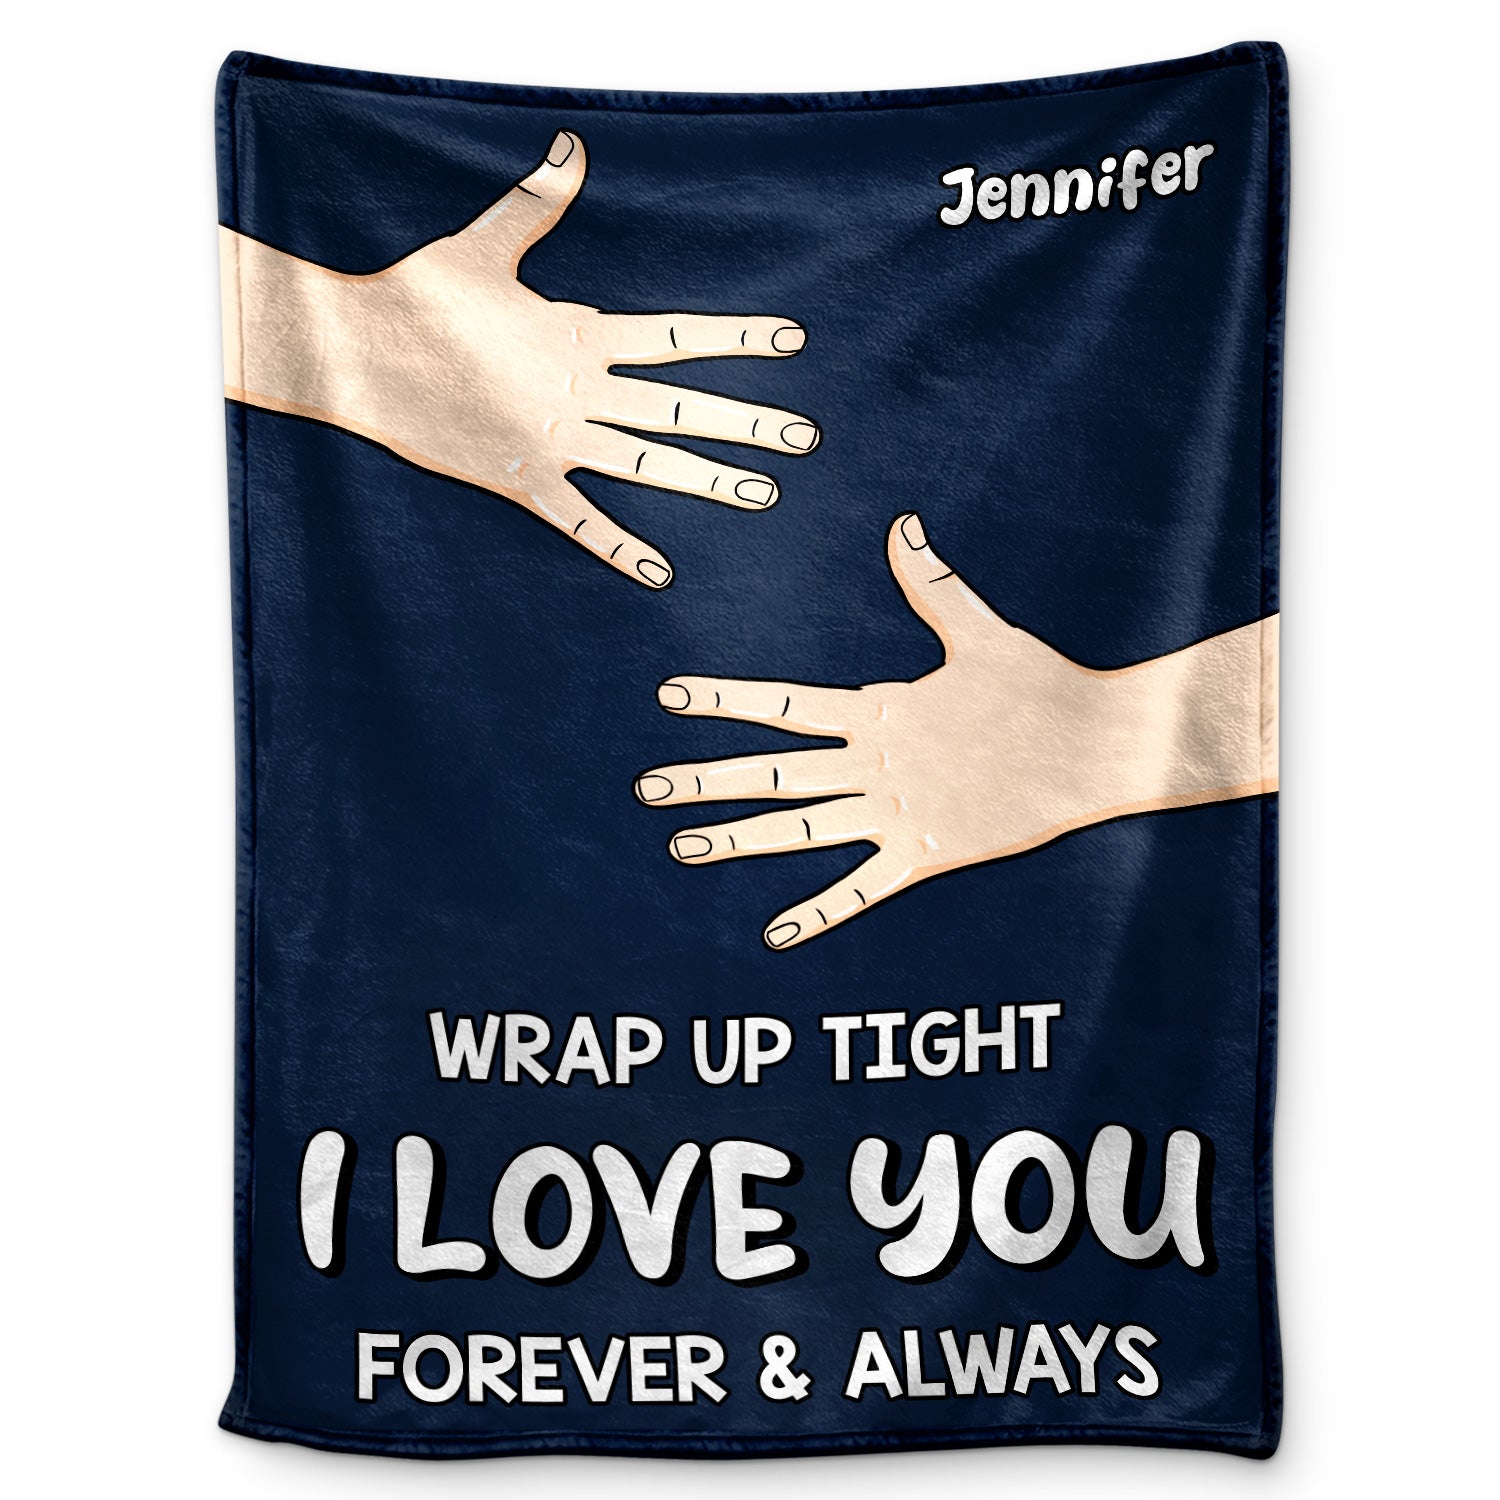 Father Blanket Wrap Up Tight - Gift For Father - Personalized Custom Fleece Blanket